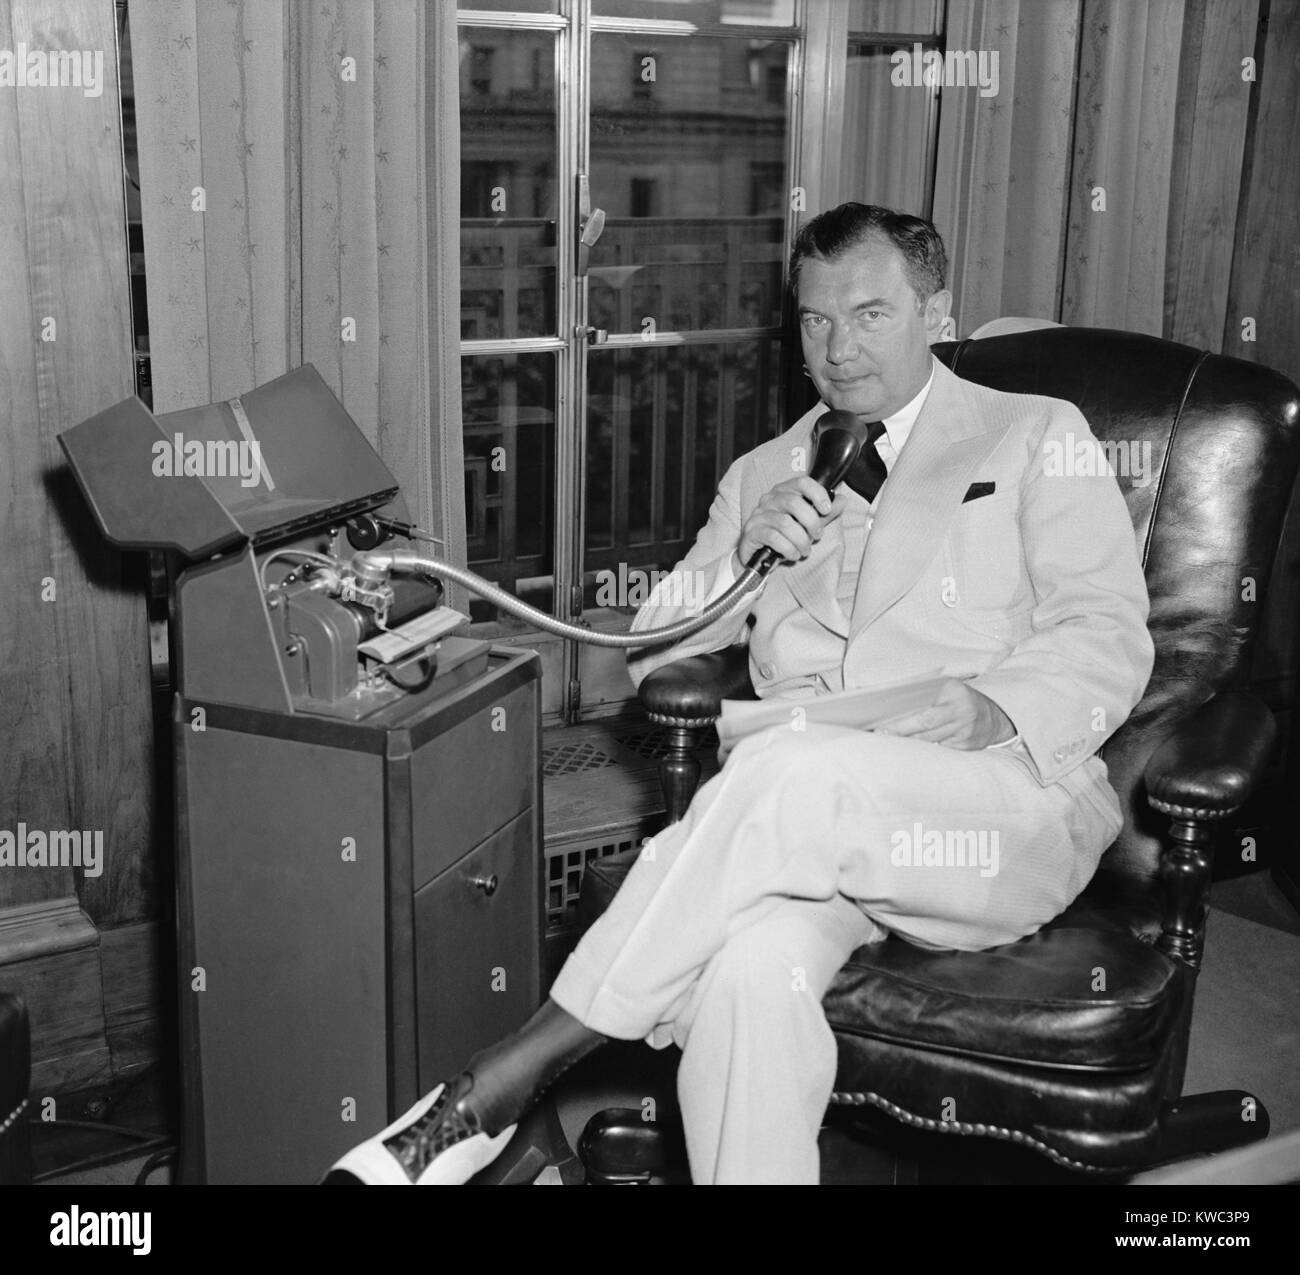 Attorney Gen. Robert H. Jackson, speaking into a Dictaphone on July 12, 1940. Dictaphones were voice recording devices invented in the 1880. Until the late 1940s, they used wax cylinders for voice recording. Robert H. Jackson, was appointed to the Supreme Court in 1941. (BSLOC 2015 14 16) Stock Photo